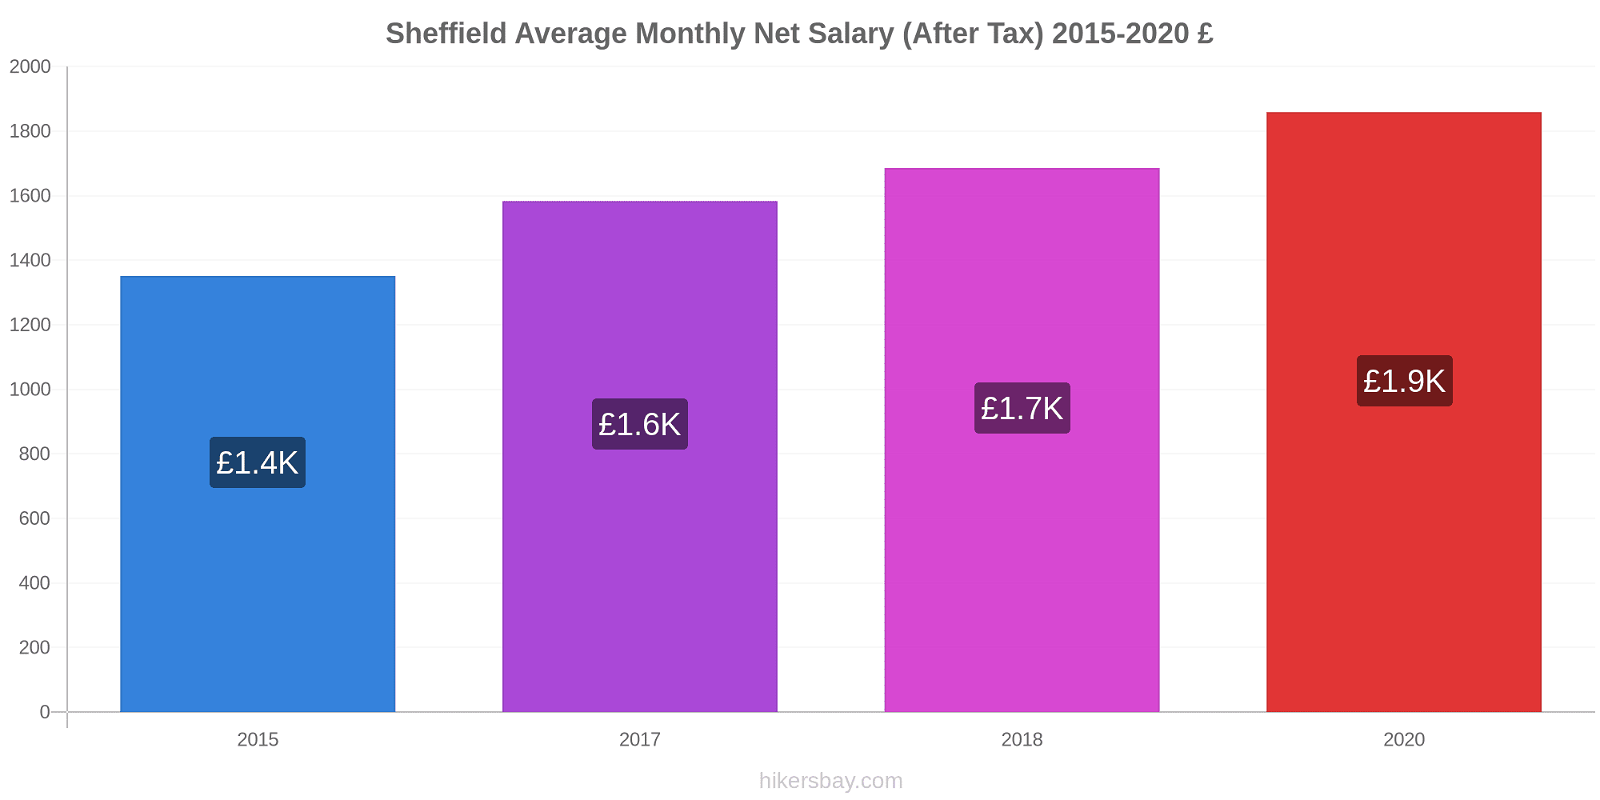 Sheffield price changes Average Monthly Net Salary (After Tax) hikersbay.com